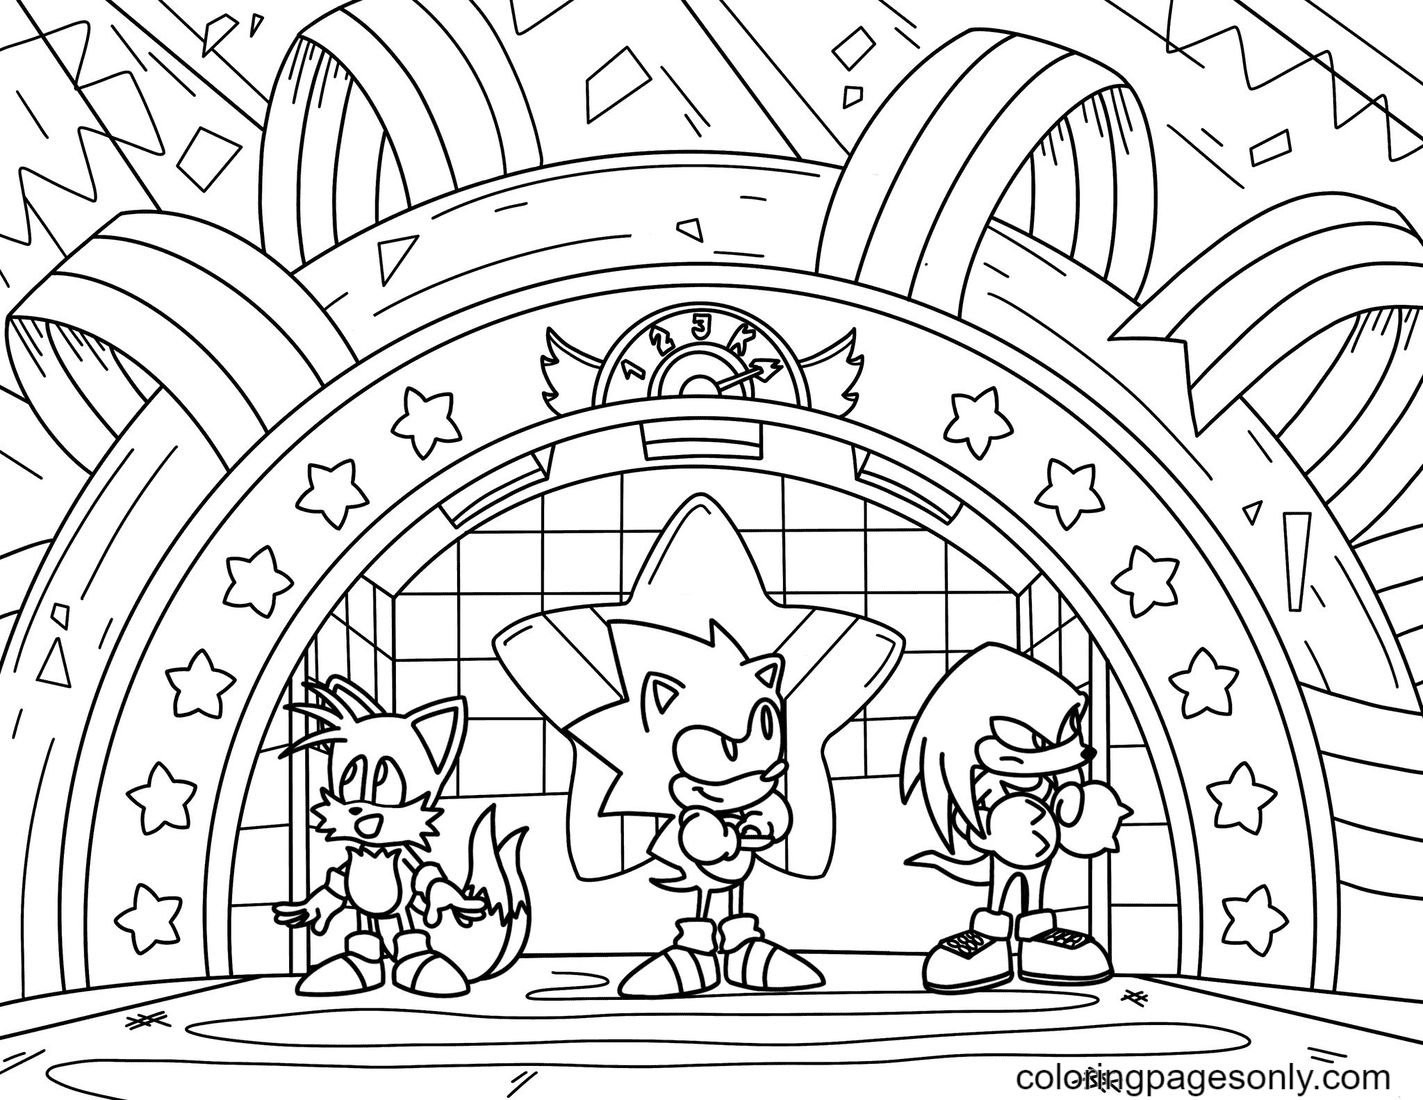 Sonic the Hedgehog Happy Friday Coloring Pages - Sonic The Hedgehog Coloring  Pages - Coloring Pages For Kids And Adults